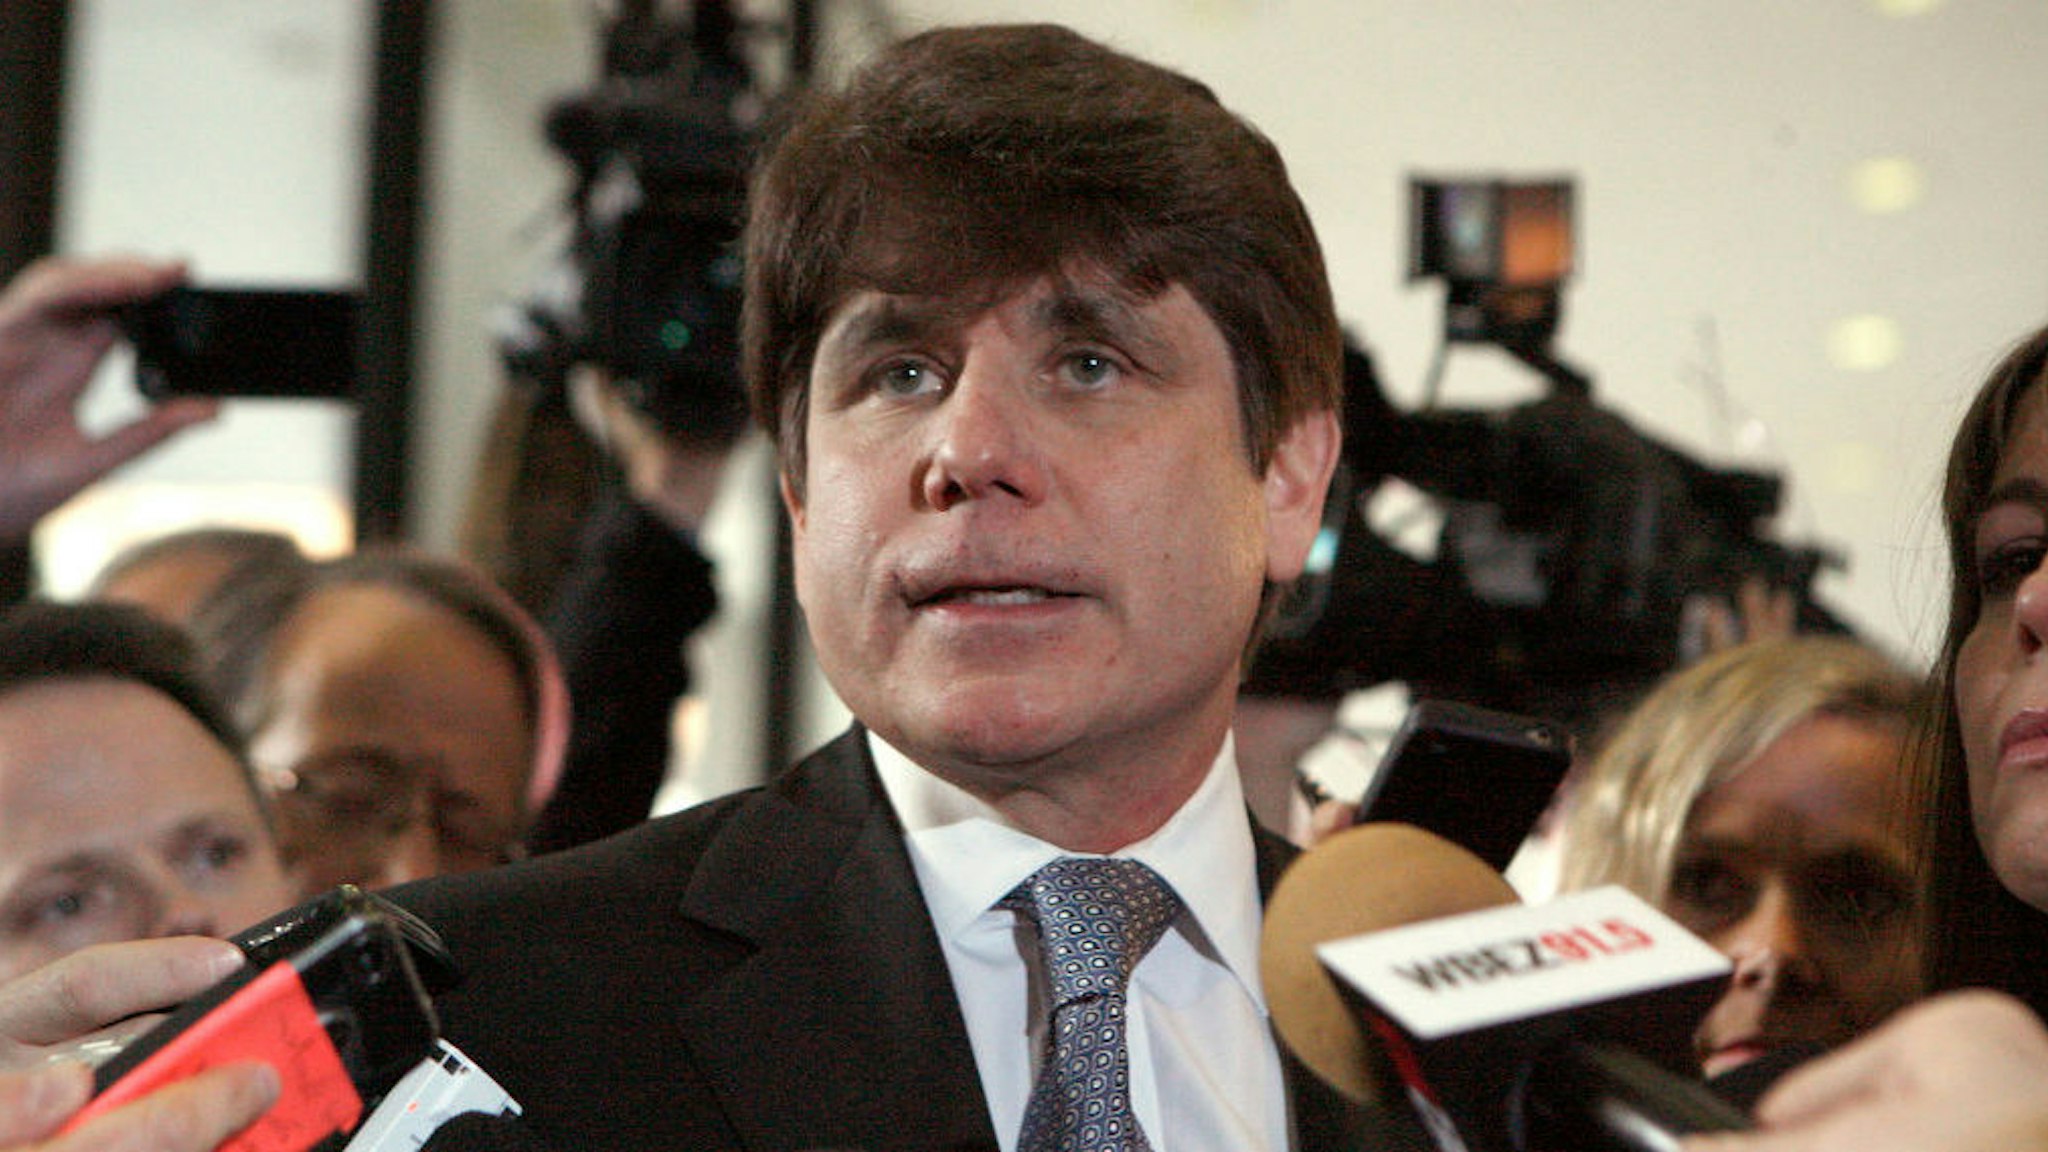 Former Illinois Governor Rod Blagojevich pauses while speaking to the media at the Dirksen Federal Building December 7, 2011 in Chicago, Illinois. Blagojevich was sentenced to 14 years in prison after he was found guilty of 17 public corruption charges. (Photo by Frank Polich/Getty Images)